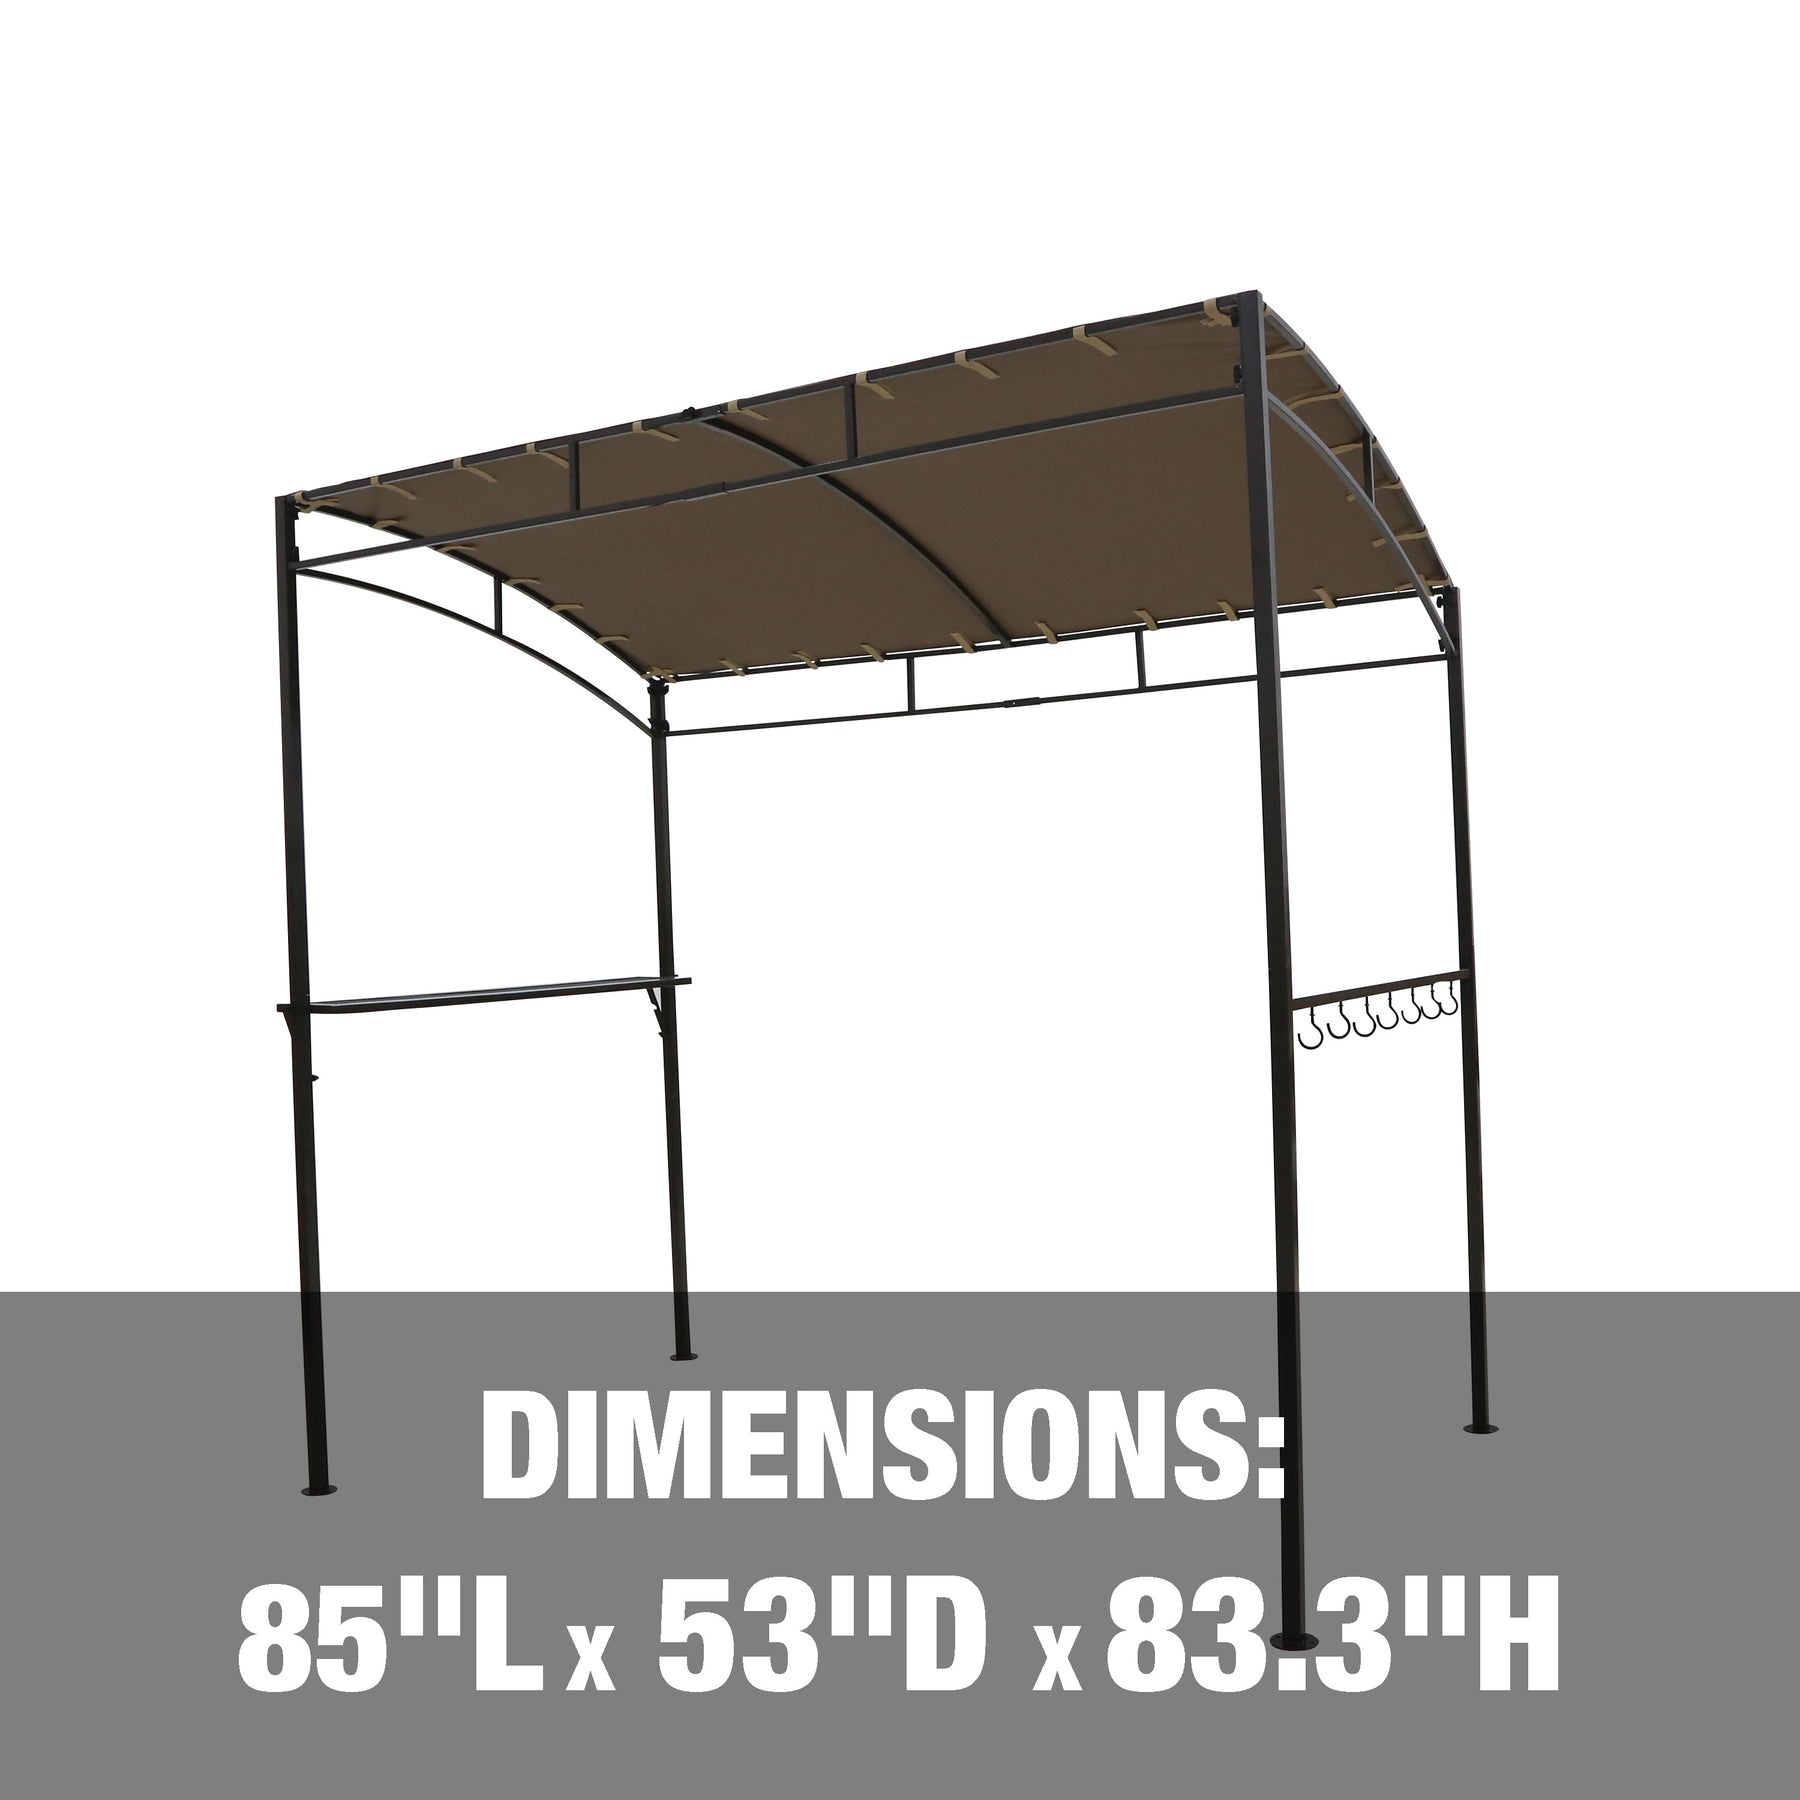 Dimensions are a length of 85 inches, Depth of 53 inches, and height of 83.3 inches.